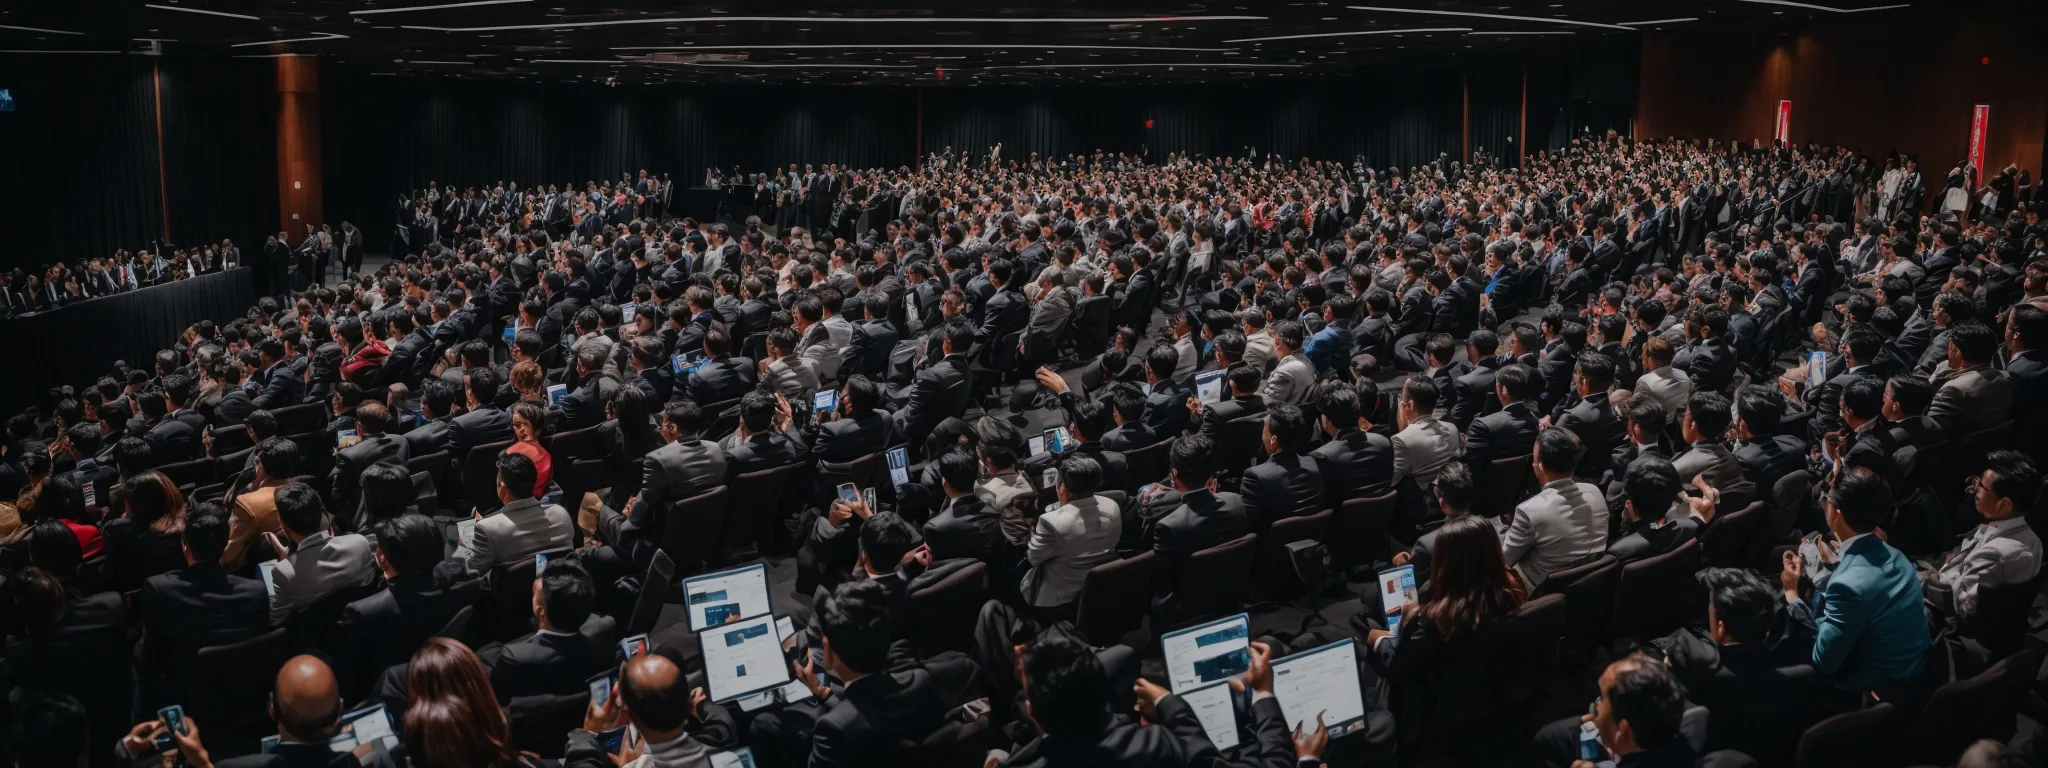 a crowded digital marketing conference with professionals discussing strategies around a large, central screen displaying seo graphs and analytics.